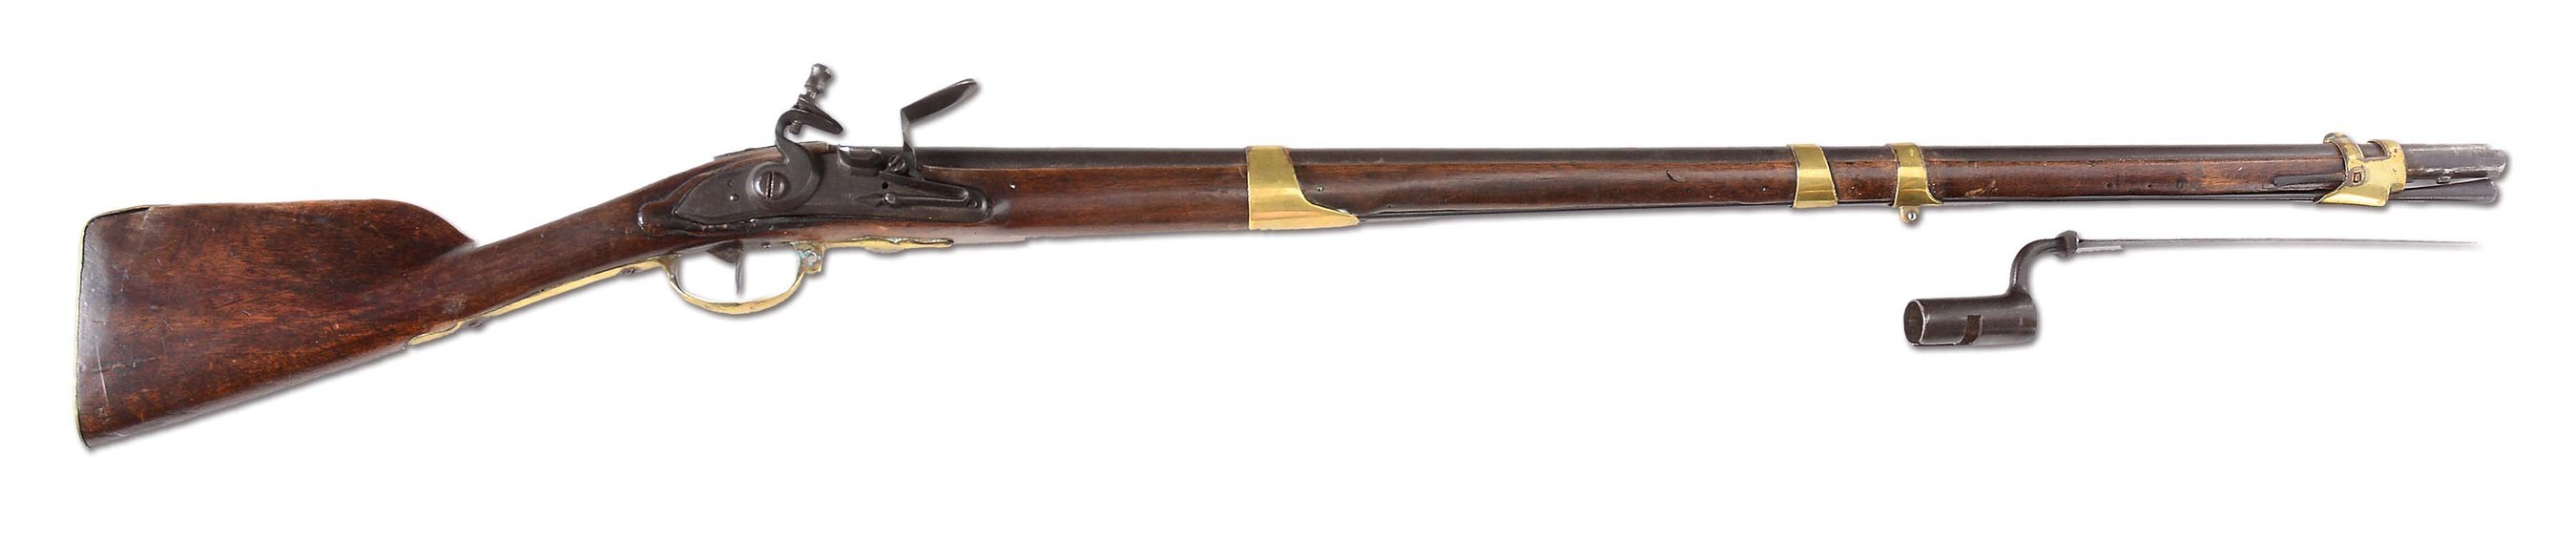 Musket That Fired First Shot At Battle Of Bunker Hill Is Star Attraction At Morphy S Oct 22 23 Auction